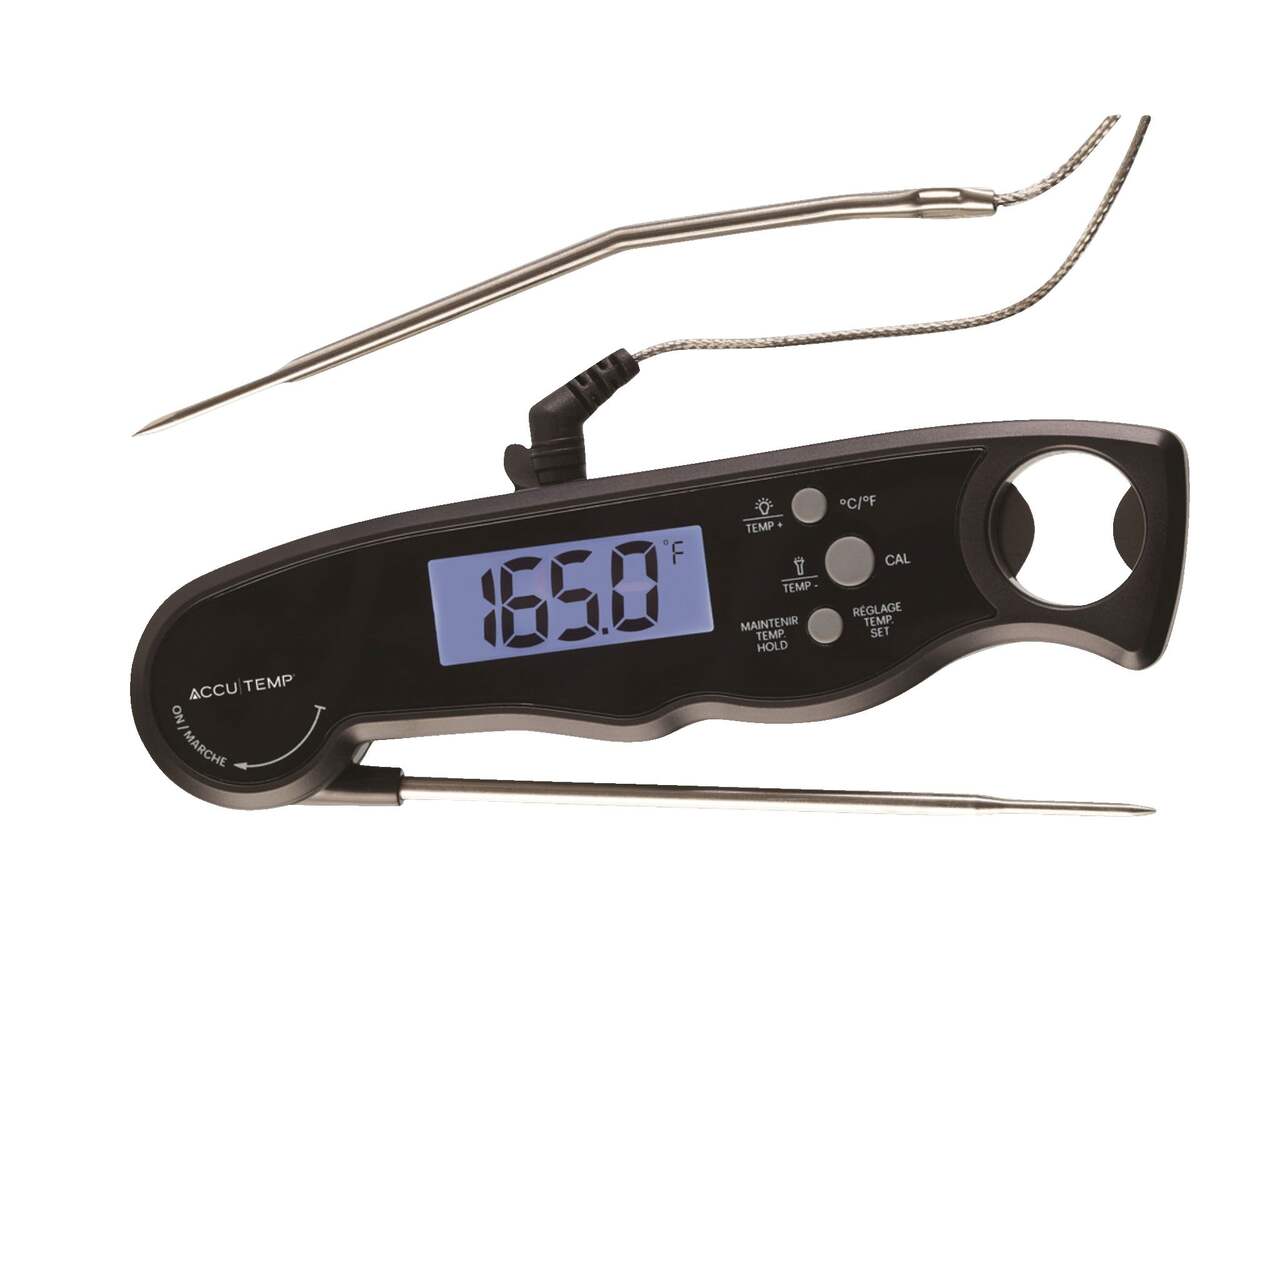 https://media-www.canadiantire.ca/product/living/kitchen/kitchen-tools-thermometers/1426621/accutemp-2-in-1-instant-and-probe-thermometer-8af318be-0915-4b33-ab91-16a942722555-jpgrendition.jpg?imdensity=1&imwidth=1244&impolicy=mZoom